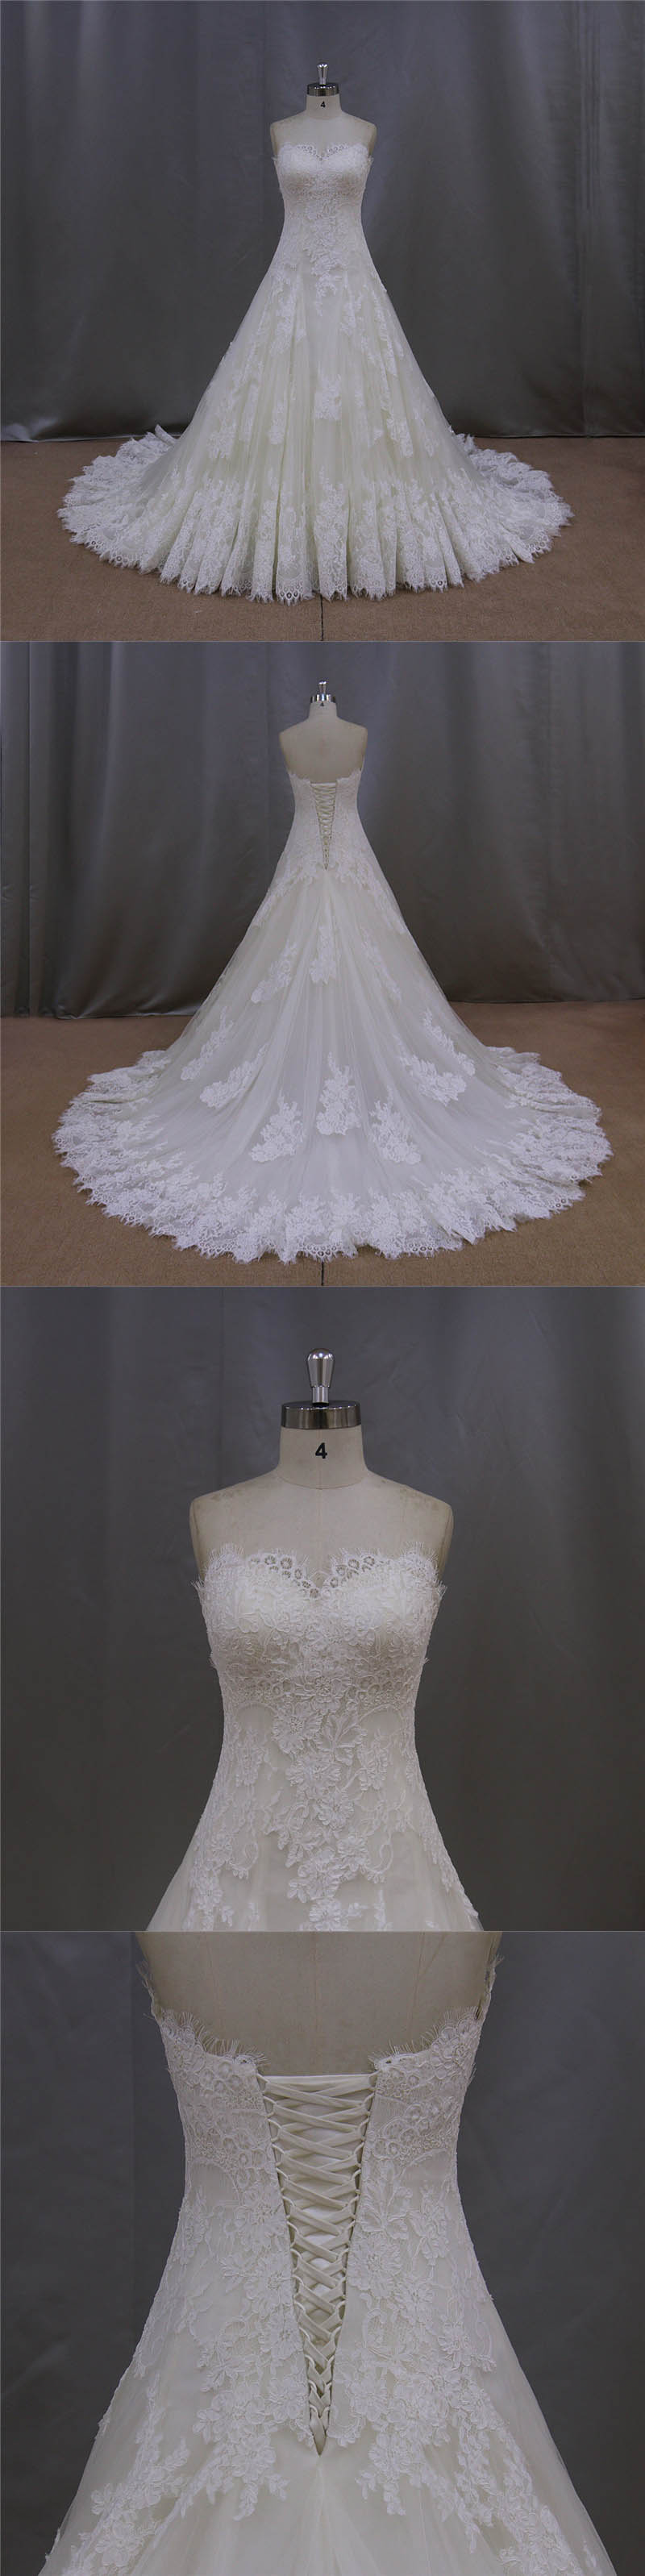 Hot Sale French Lace Aline Wedding Dresses